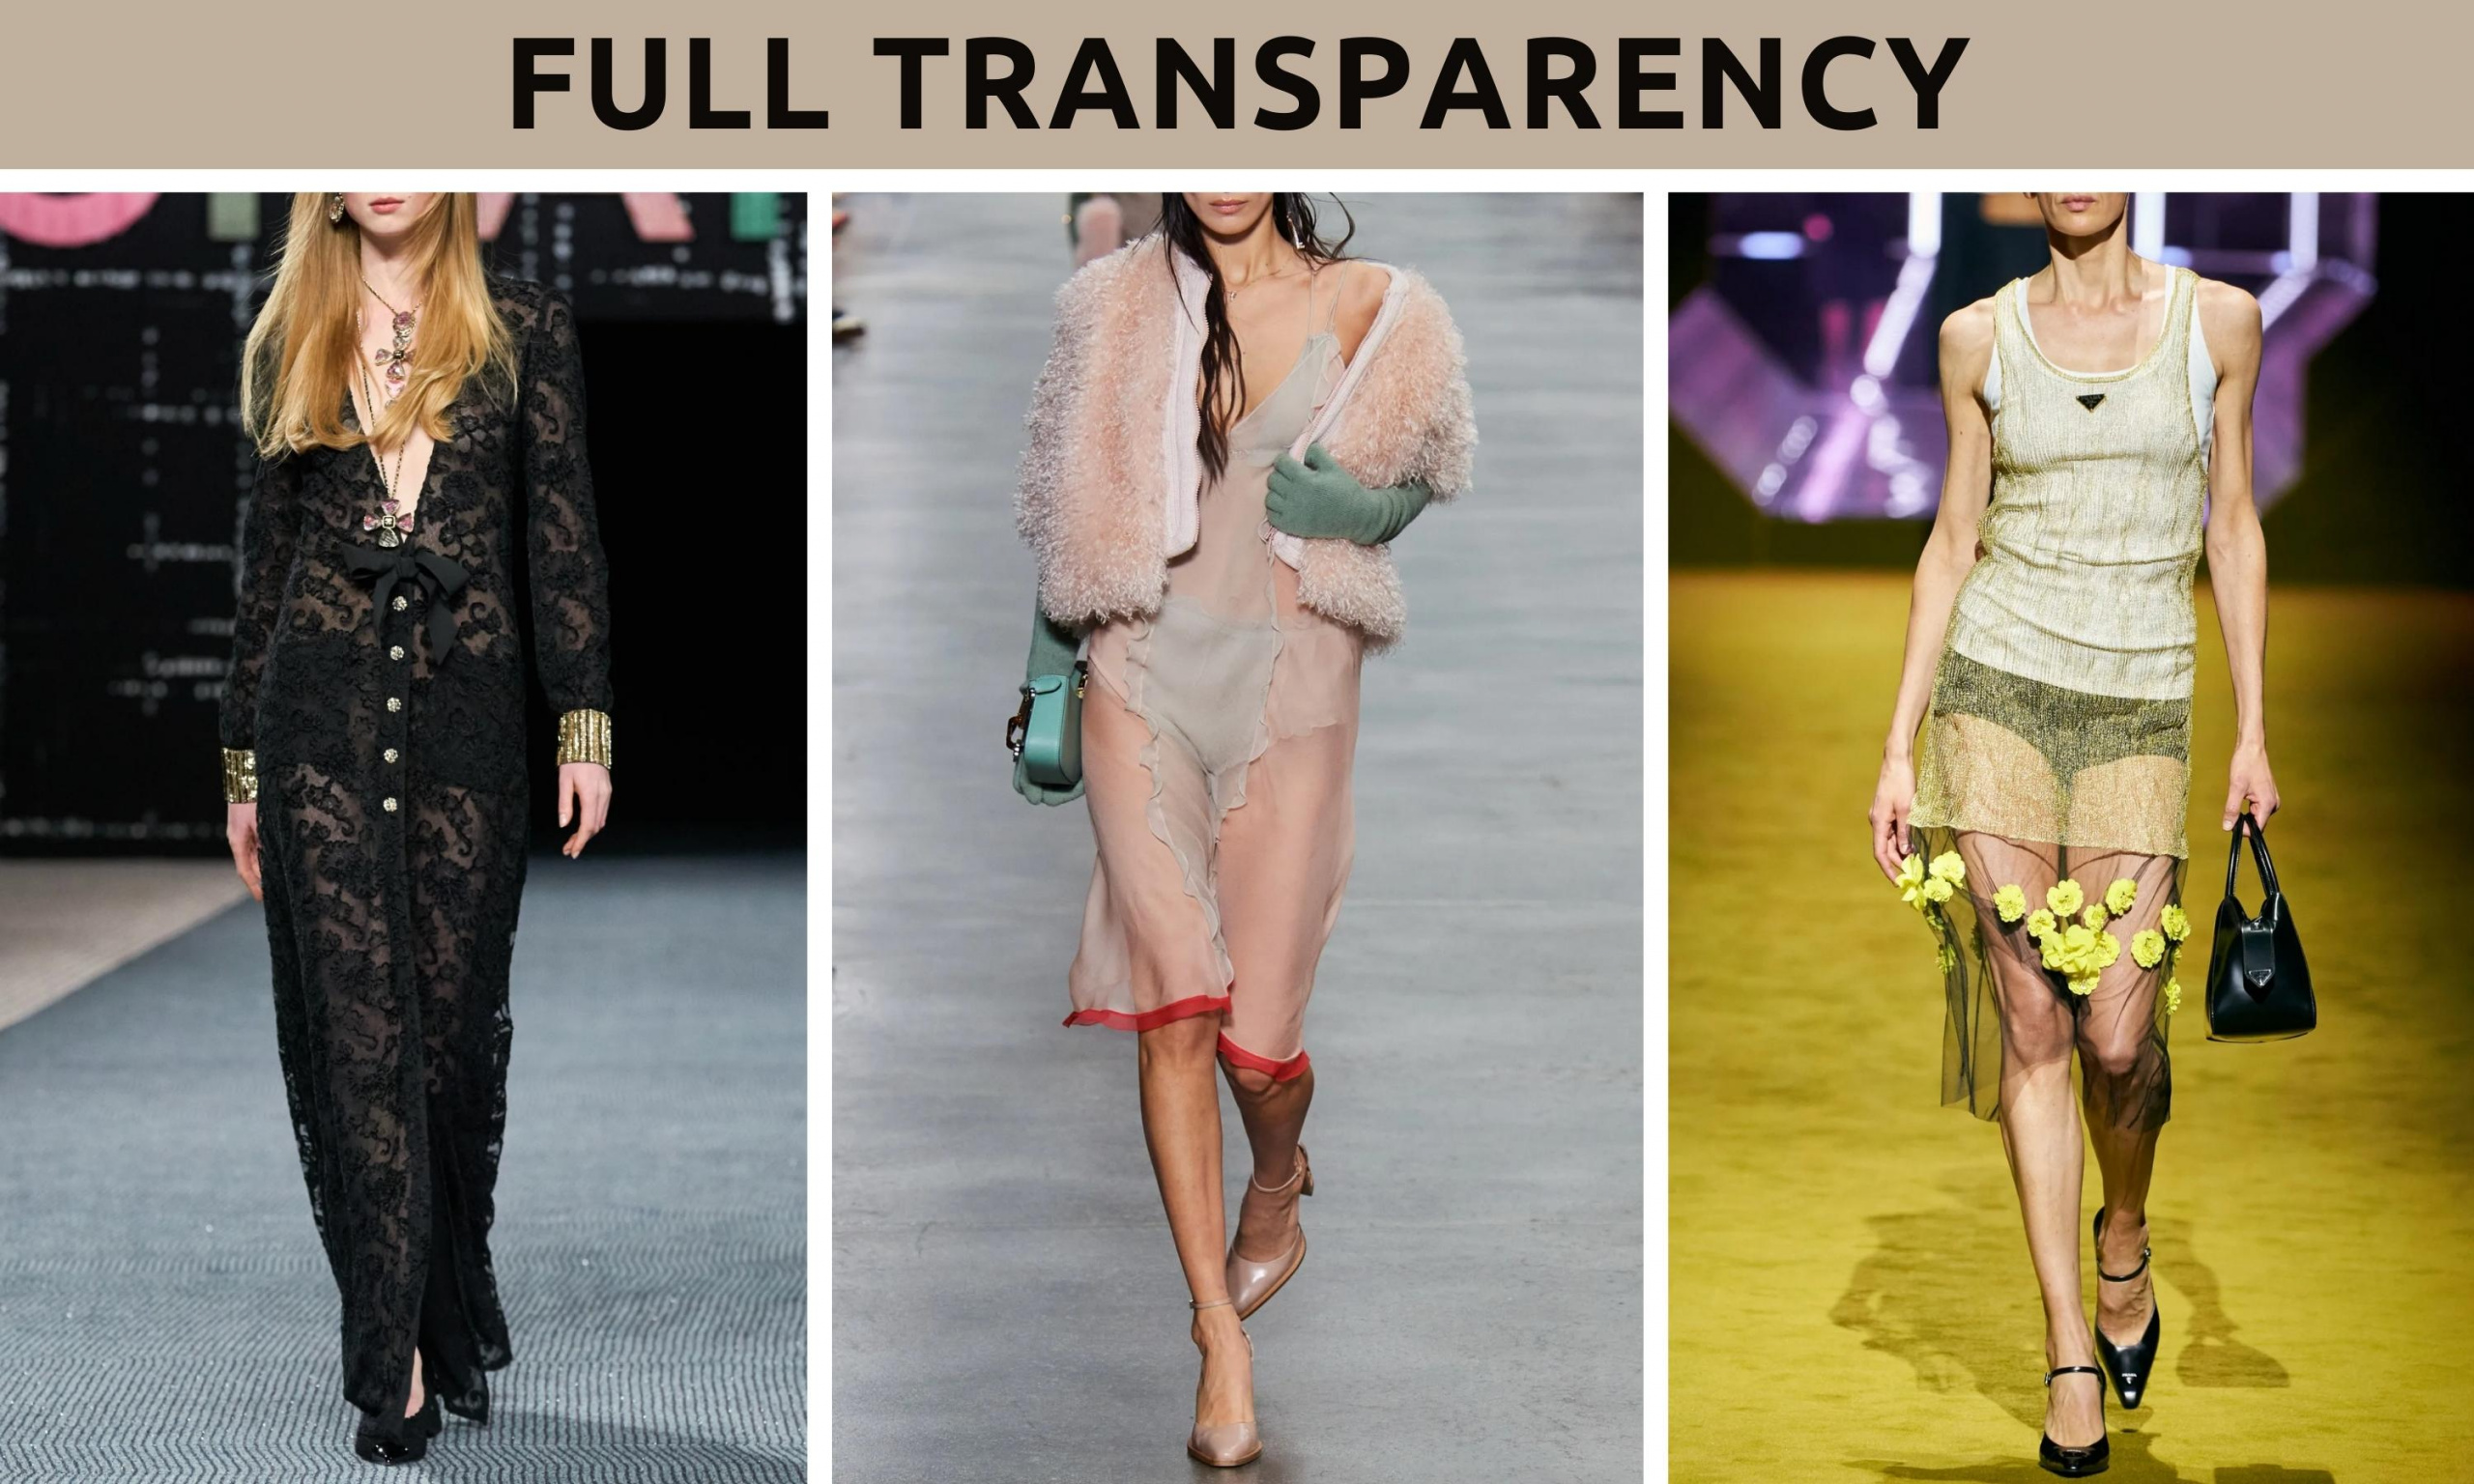 wearable fall trends, fall fashion trends, fall trends, wearable trends, how to wear trends, trends over 40, wearing trends over 40, 2022 fall fashion trends, 2022 wearable fall trends, full transparency, see-through clothing trend, sheer clothing trend